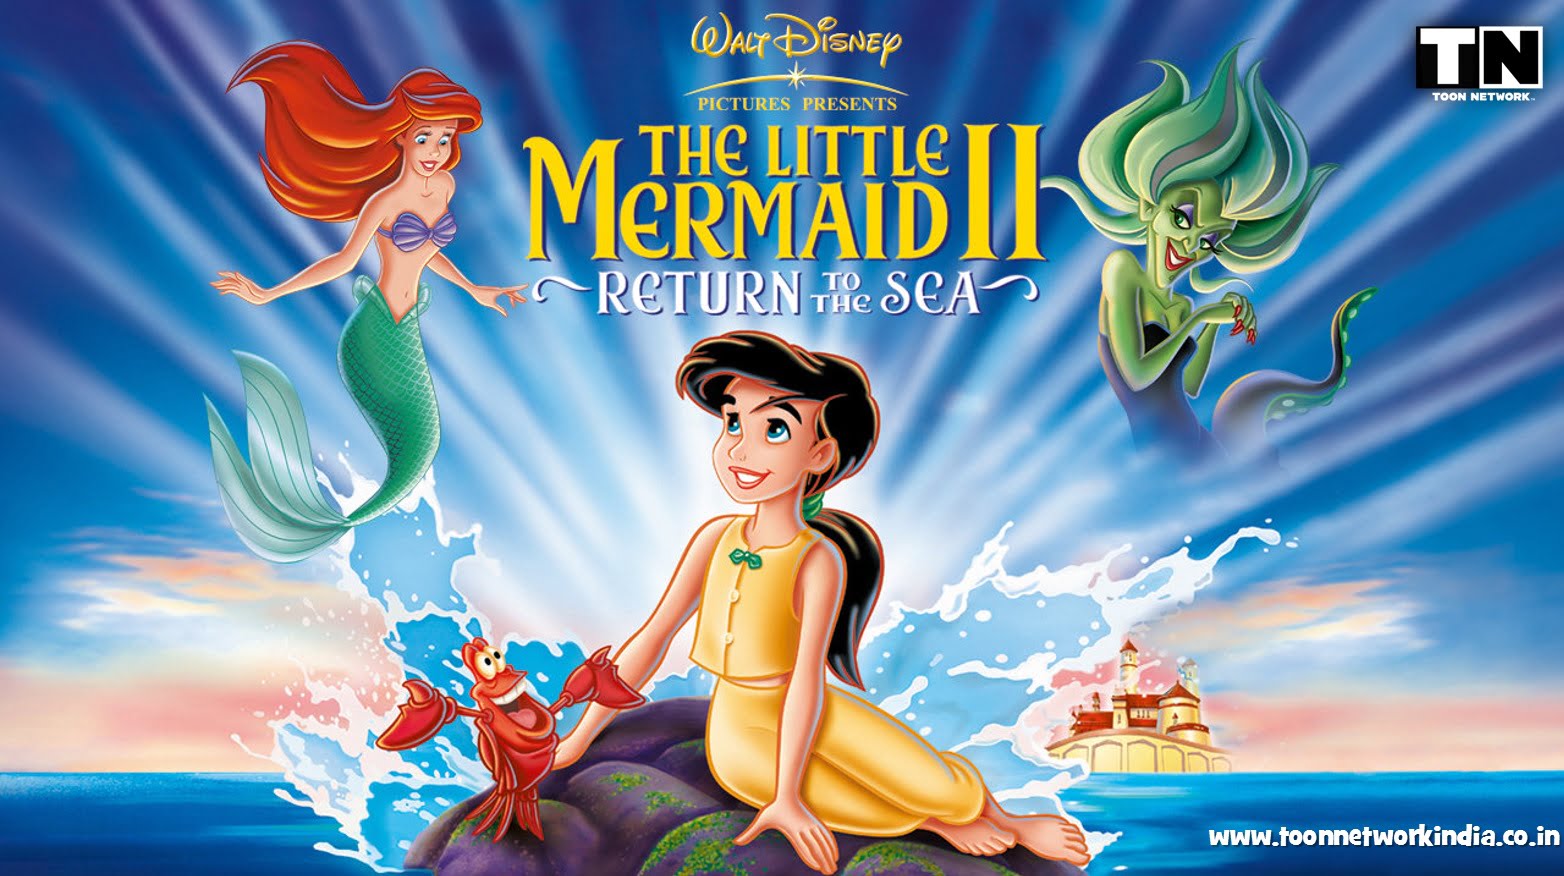 Little Mermaid 2 Free Download Hindi Dubbed 300 MB - Animation Hindi Dubbed